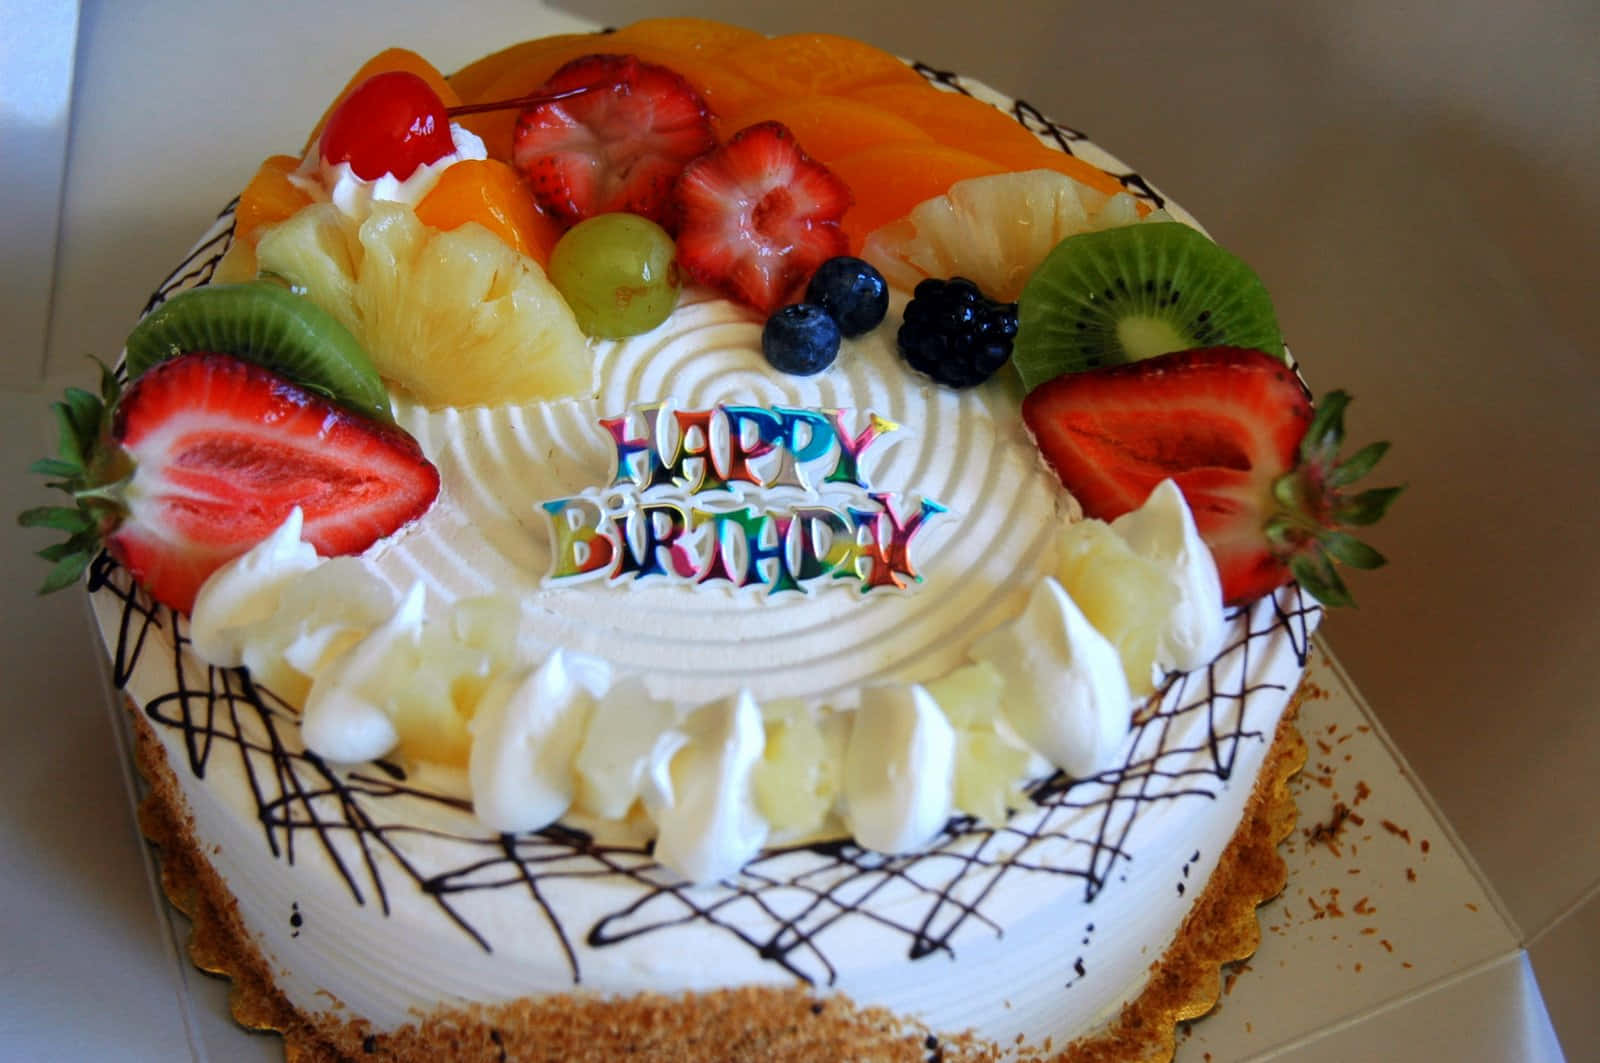 A Cake With Fruit On It